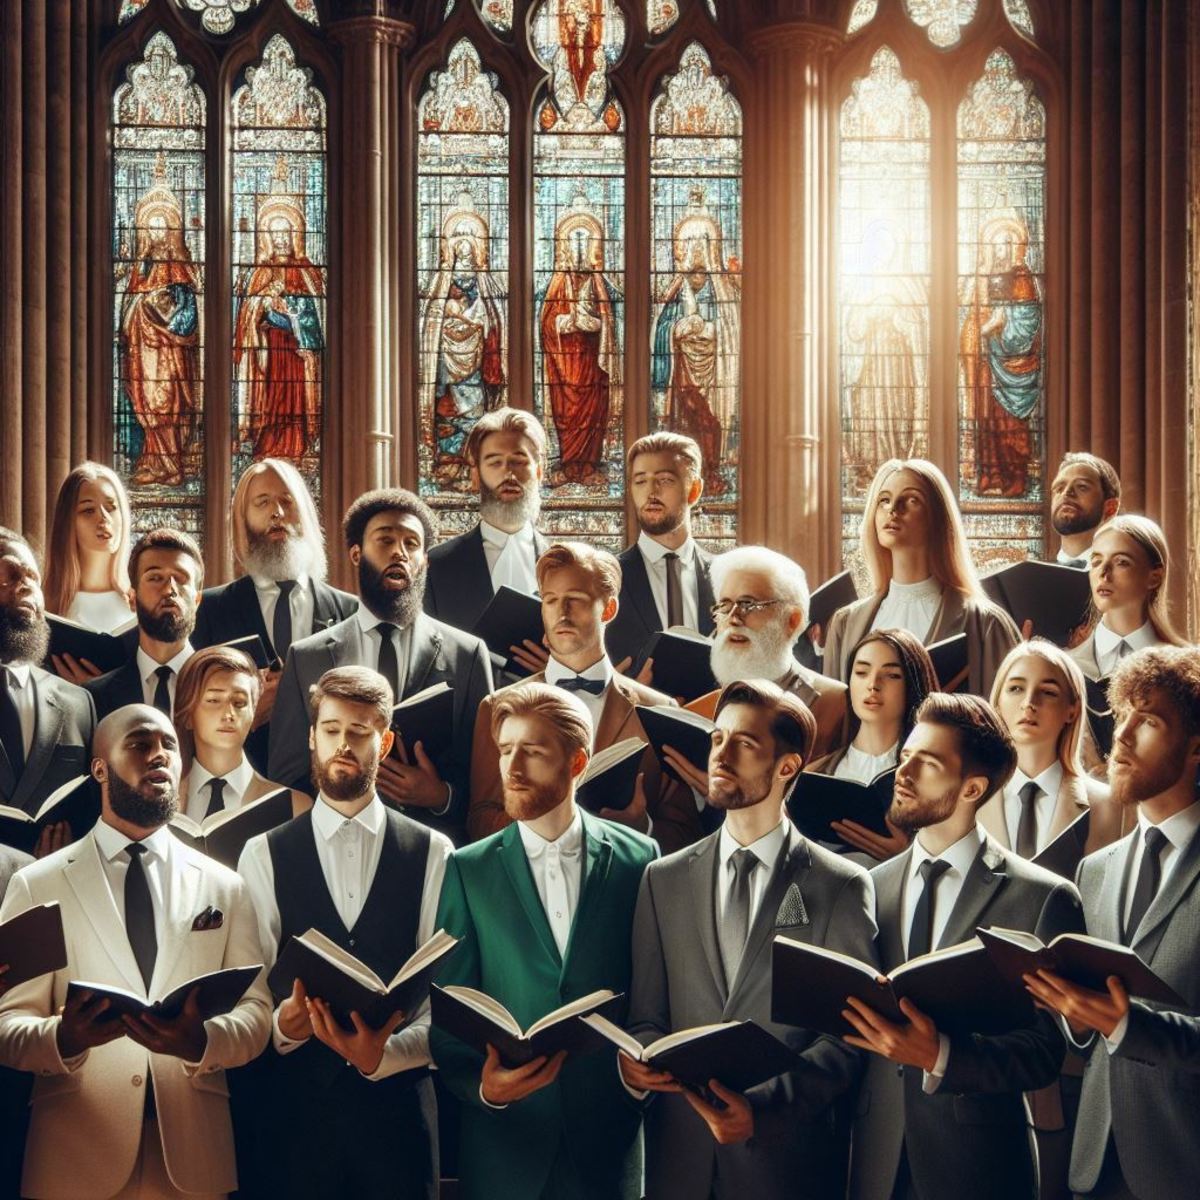 11 of the Greatest Christian Hymns